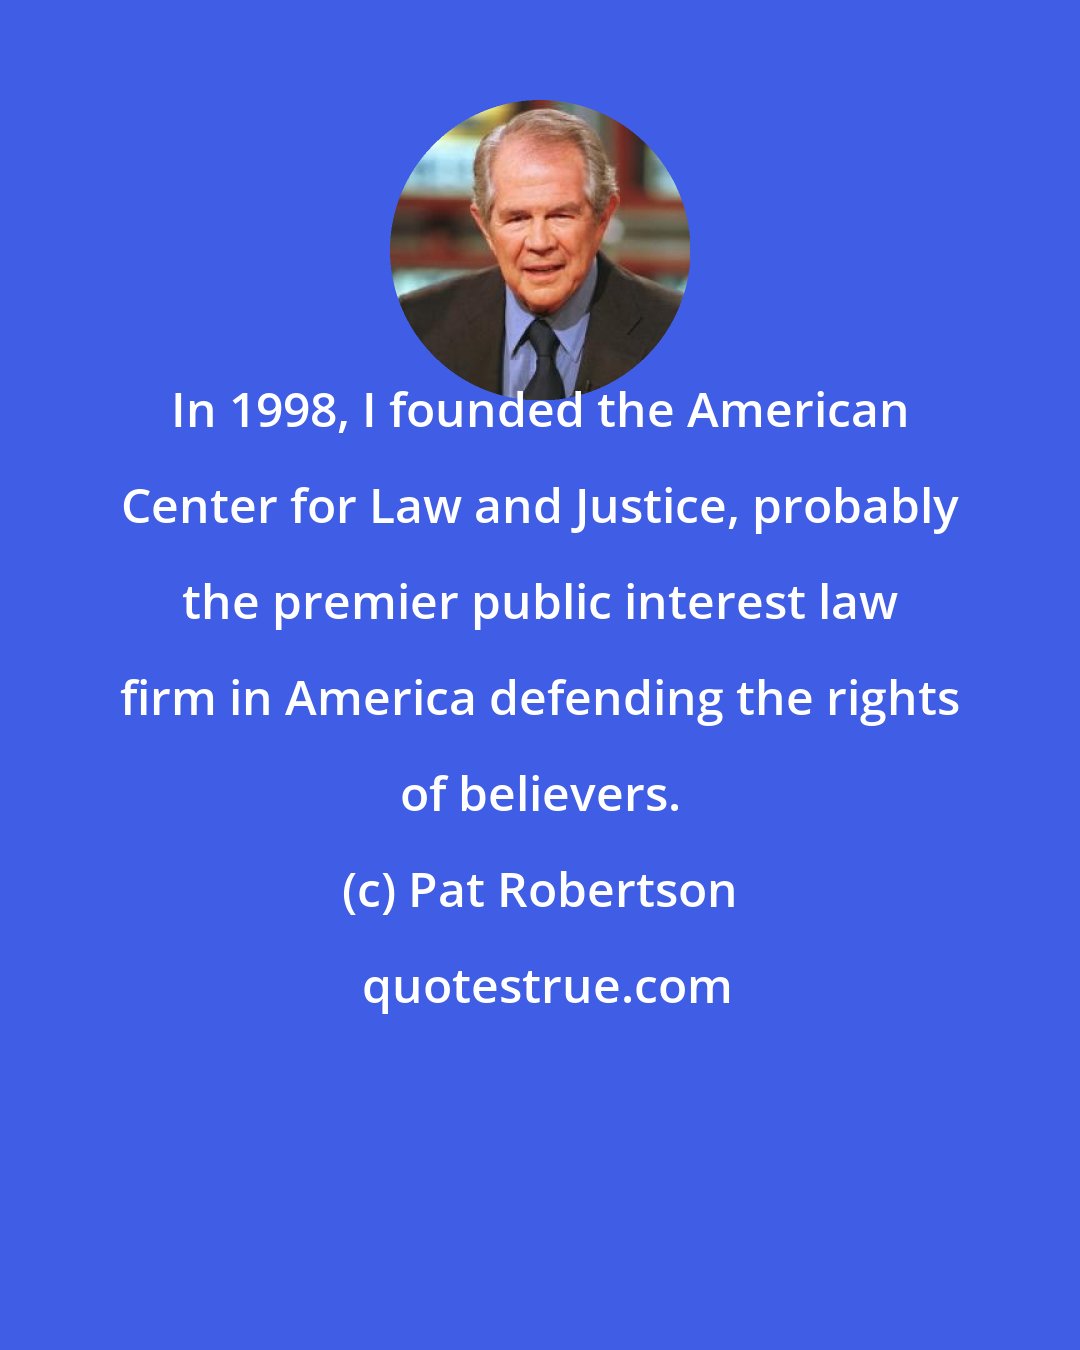 Pat Robertson: In 1998, I founded the American Center for Law and Justice, probably the premier public interest law firm in America defending the rights of believers.